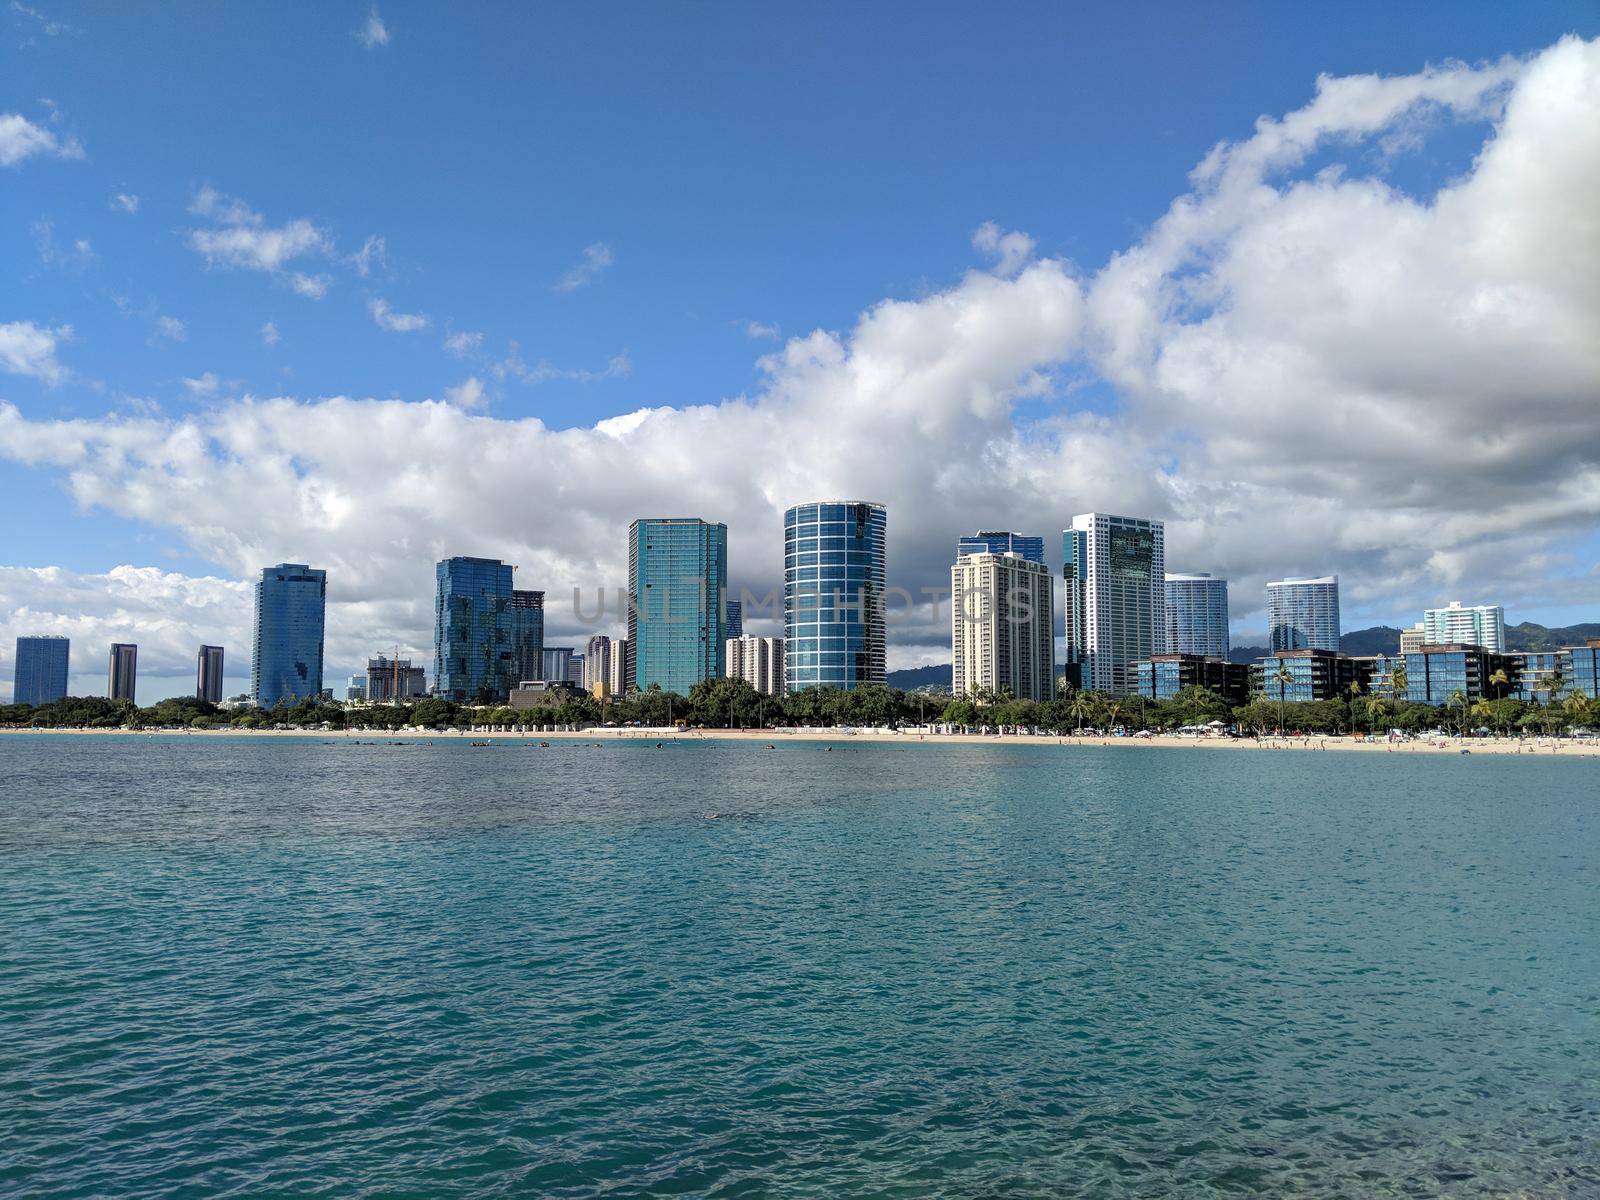 Waters and beach of Ala Moana Beach Park with office building and condos in the background during a beautiful day on the island of Oahu, Hawaii. 